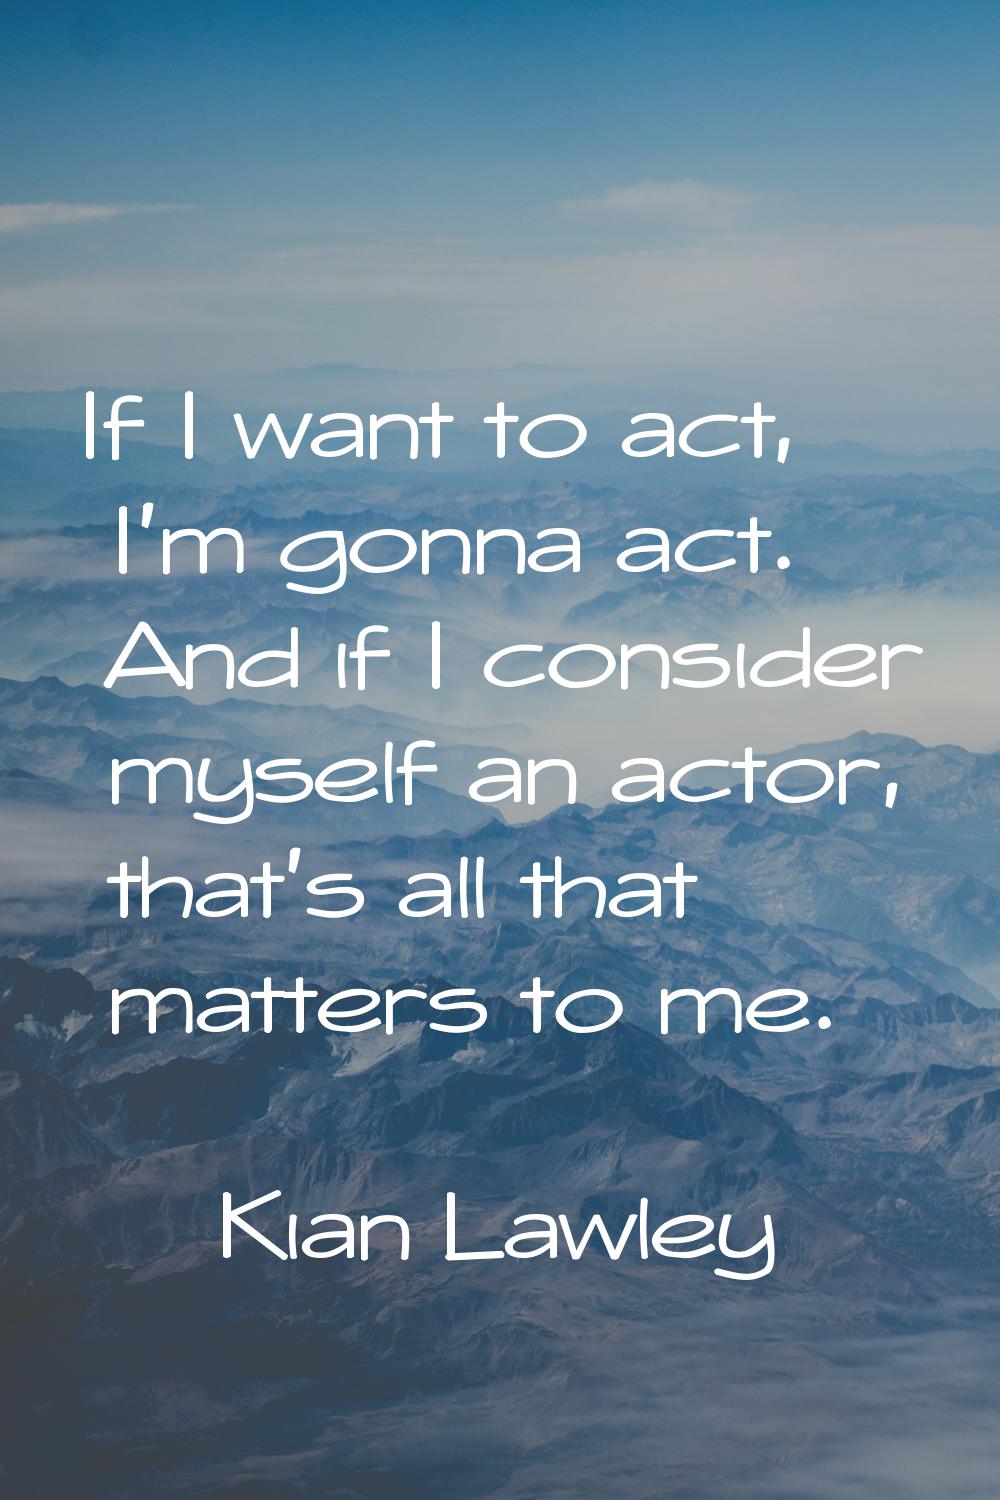 If I want to act, I'm gonna act. And if I consider myself an actor, that's all that matters to me.